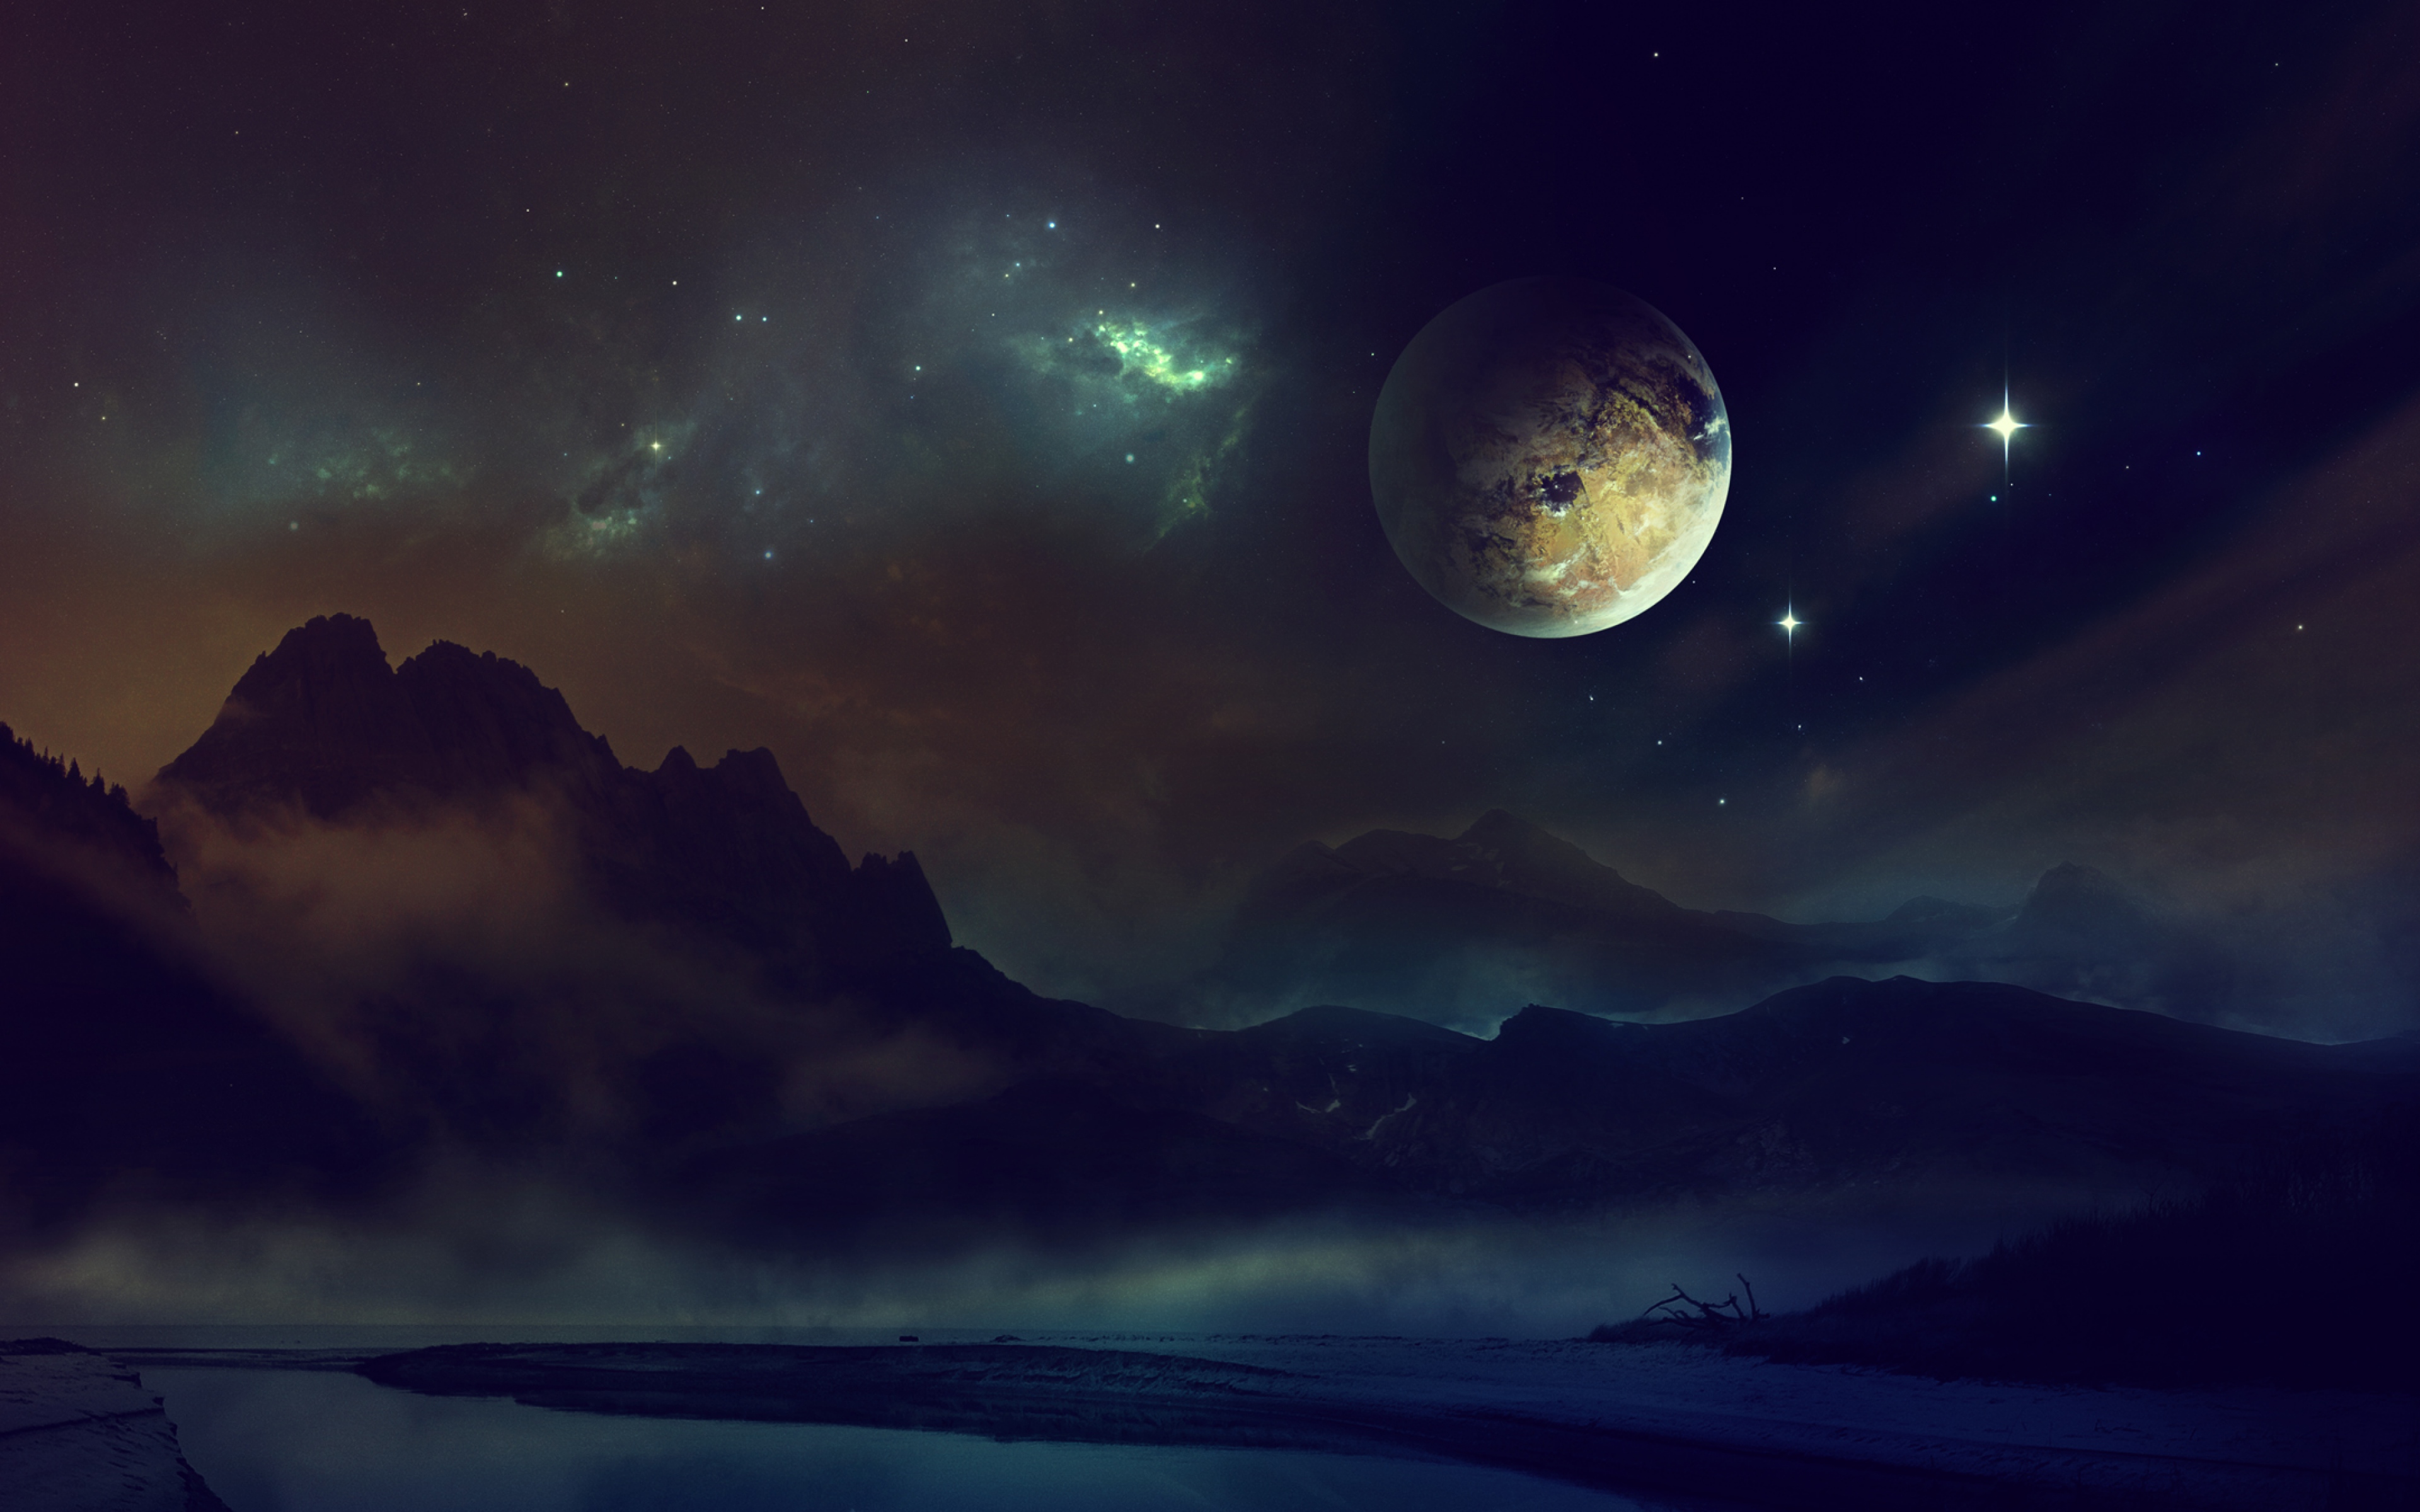 Wallpaper 4k Pc Night Galaxy Wallpaper 4k 48 Images Here Is A